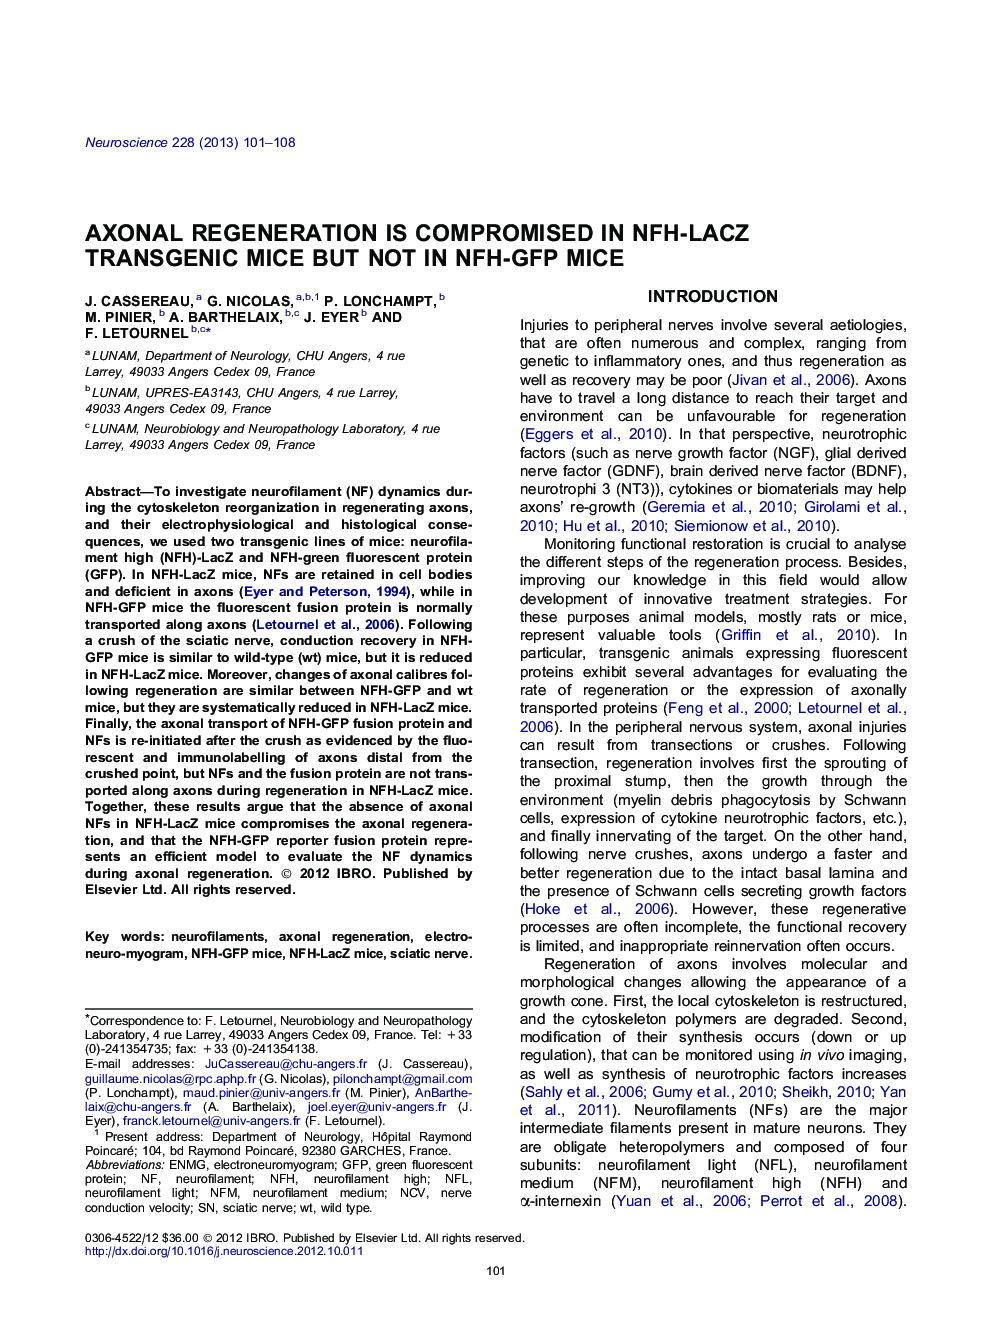 Axonal regeneration is compromised in NFH-LacZ transgenic mice but not in NFH-GFP mice